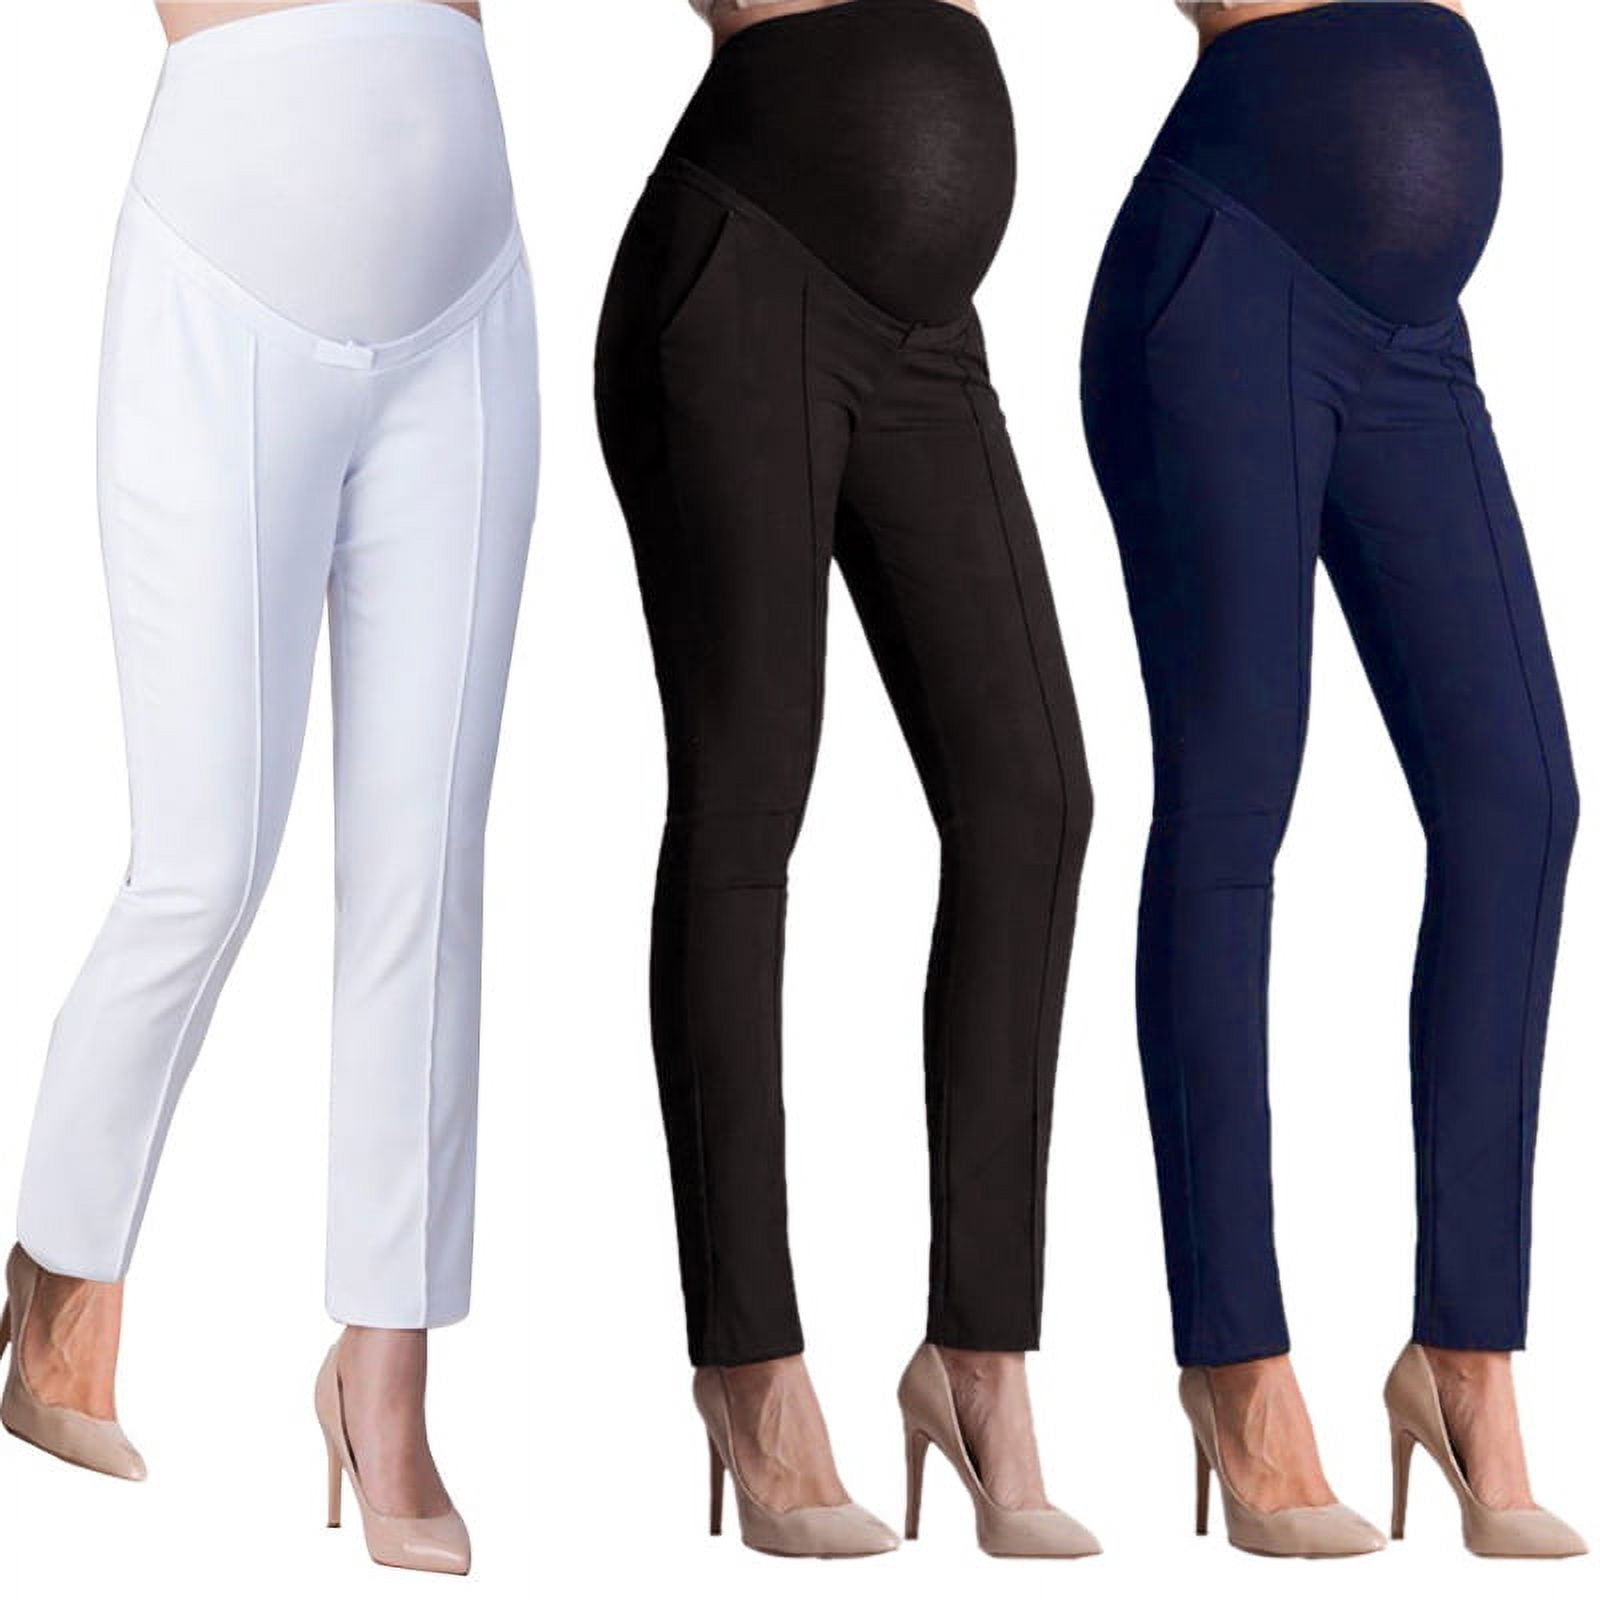 Pregnant Women Work Pants Stretchy Maternity Skinny Ankle Trousers